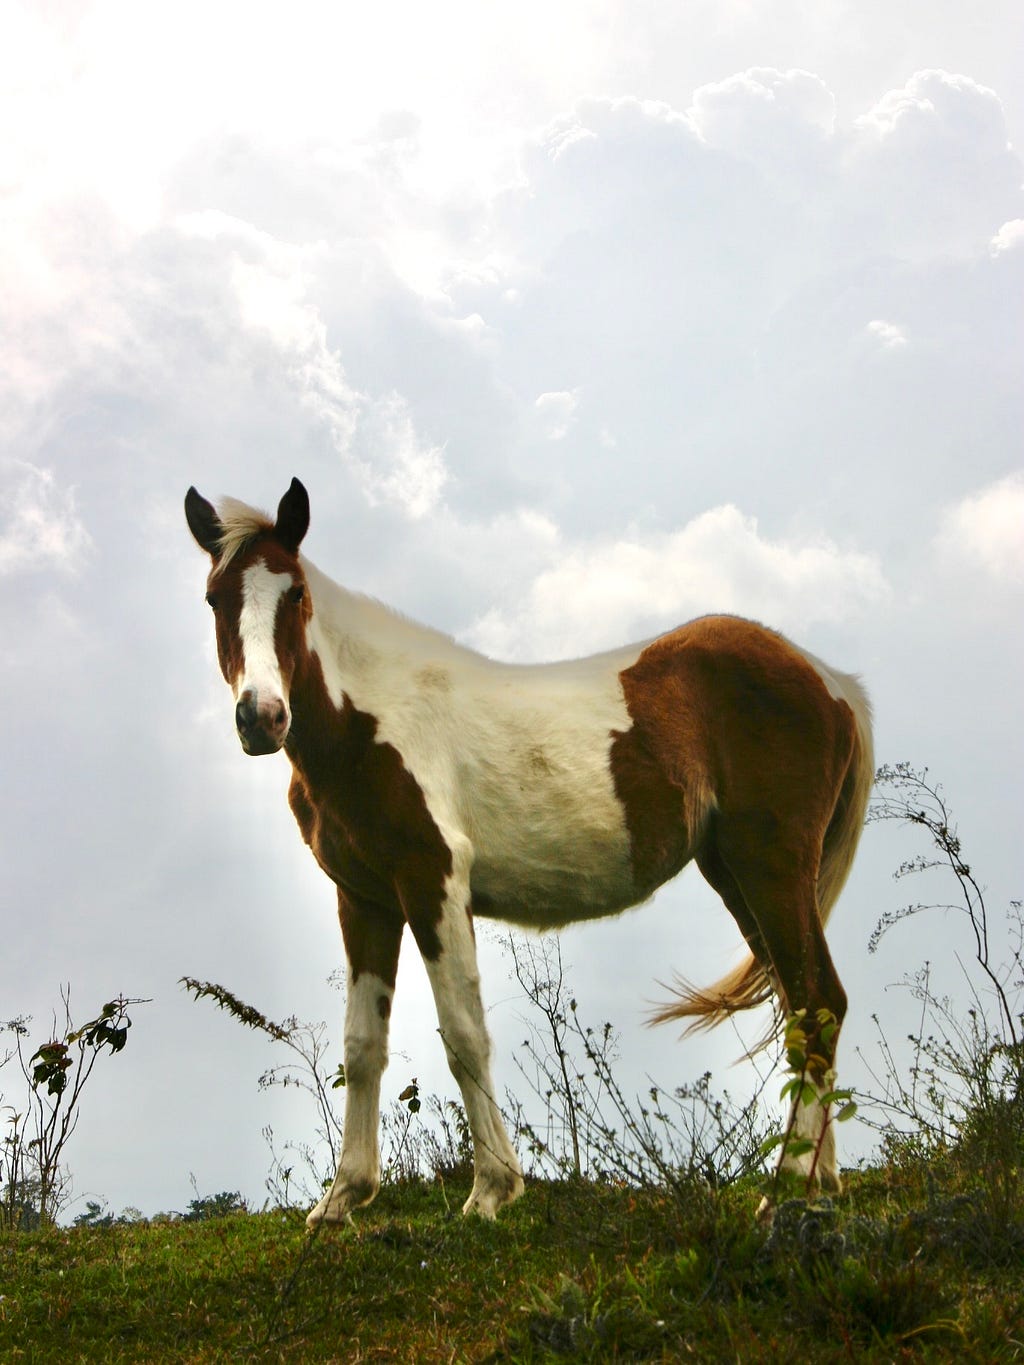 Color image of a white steed with brown bits on its hind, chest, ears, and either side of its face standing in a grassy field against a grayish cloudy sky background, staring straight at the author’s camera.